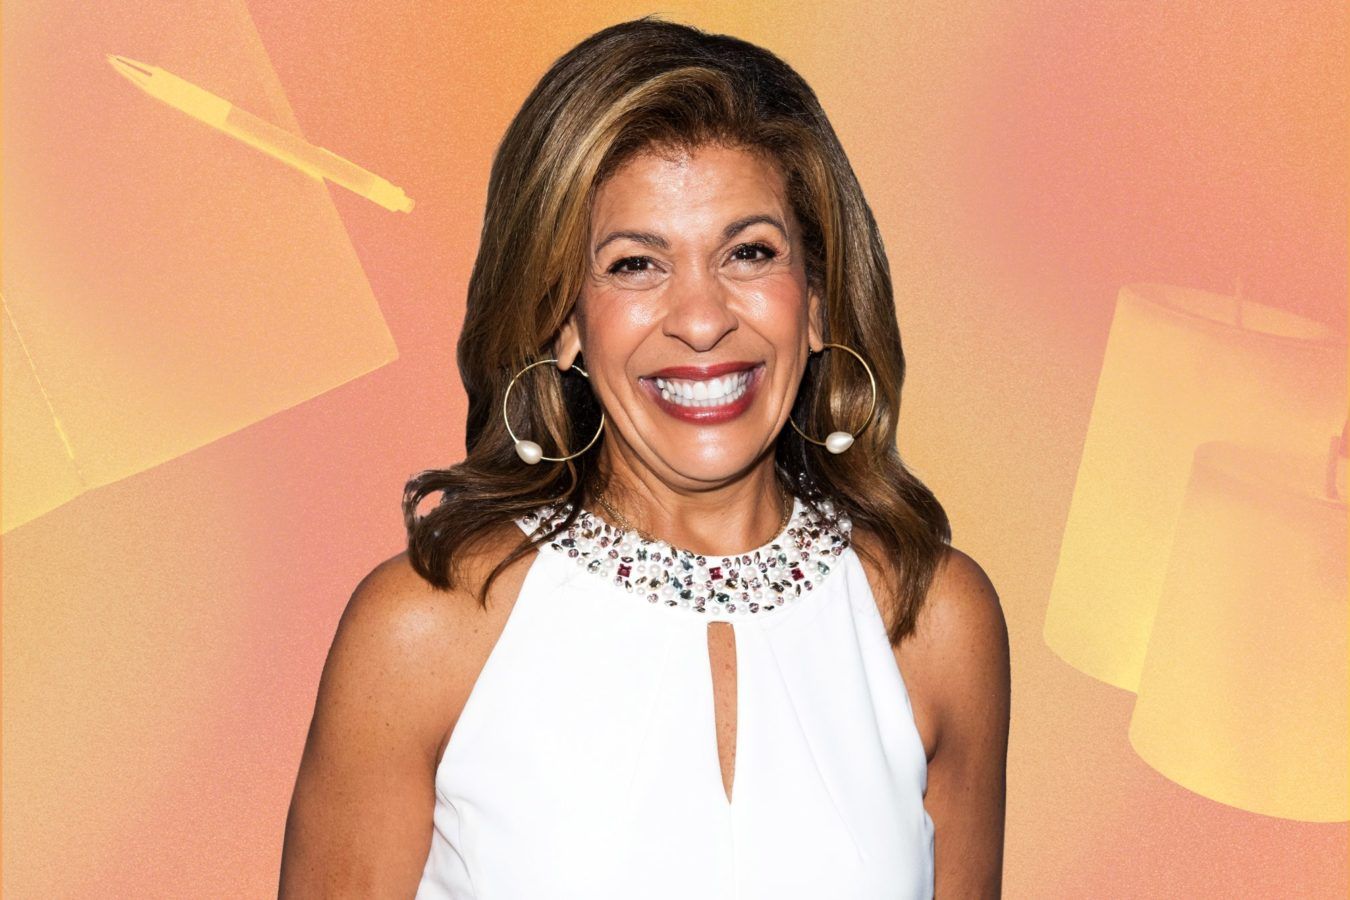 Hoda Kotb’s am routine will turn even the crankiest of night owls into early risers